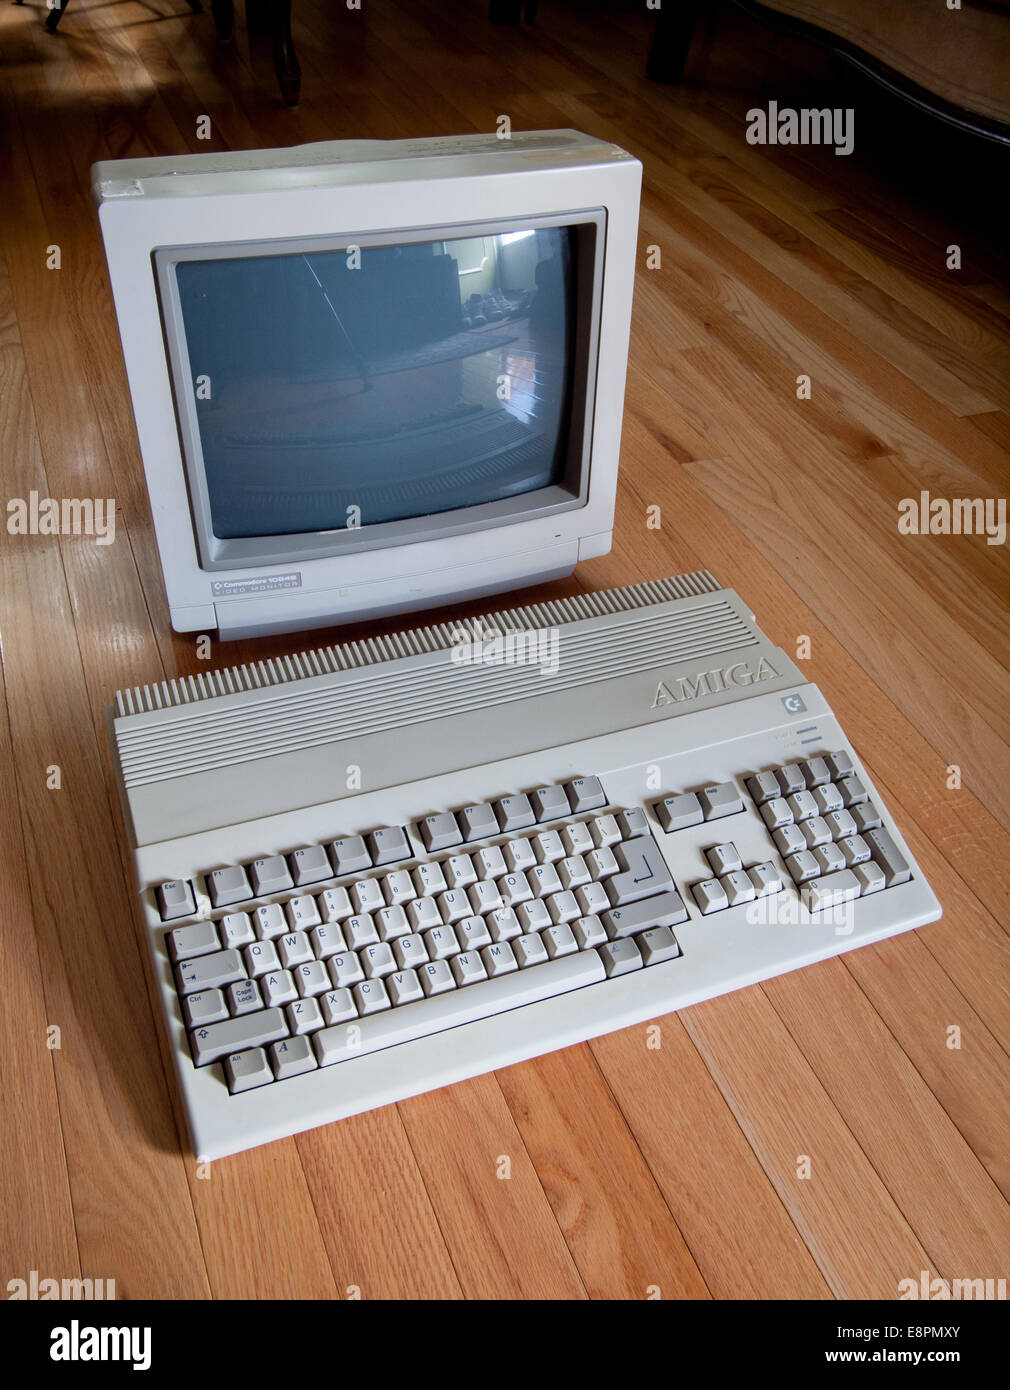 A view of a Commodore Amiga 500 computer and a Commodore 1084S